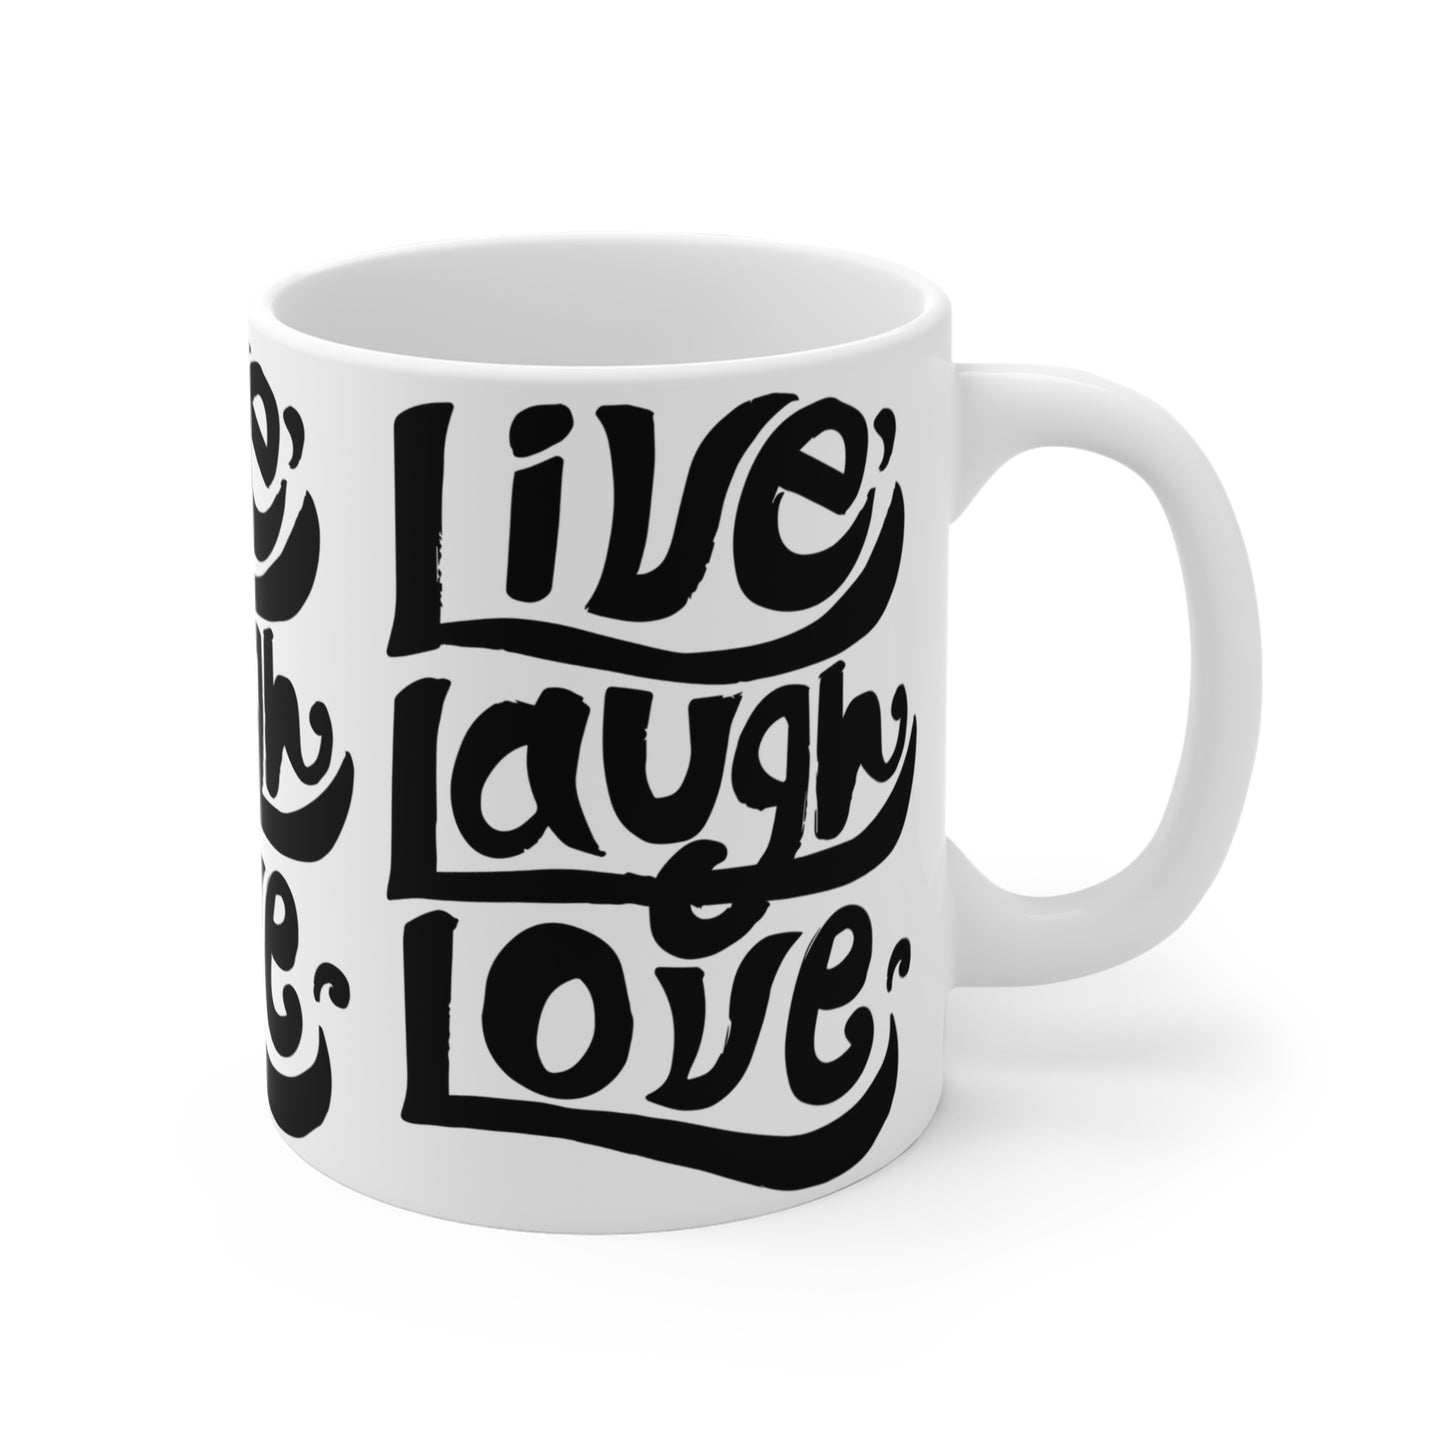 Mug with custom design 11oz, Cup with special phrase (Live, laugh, love)